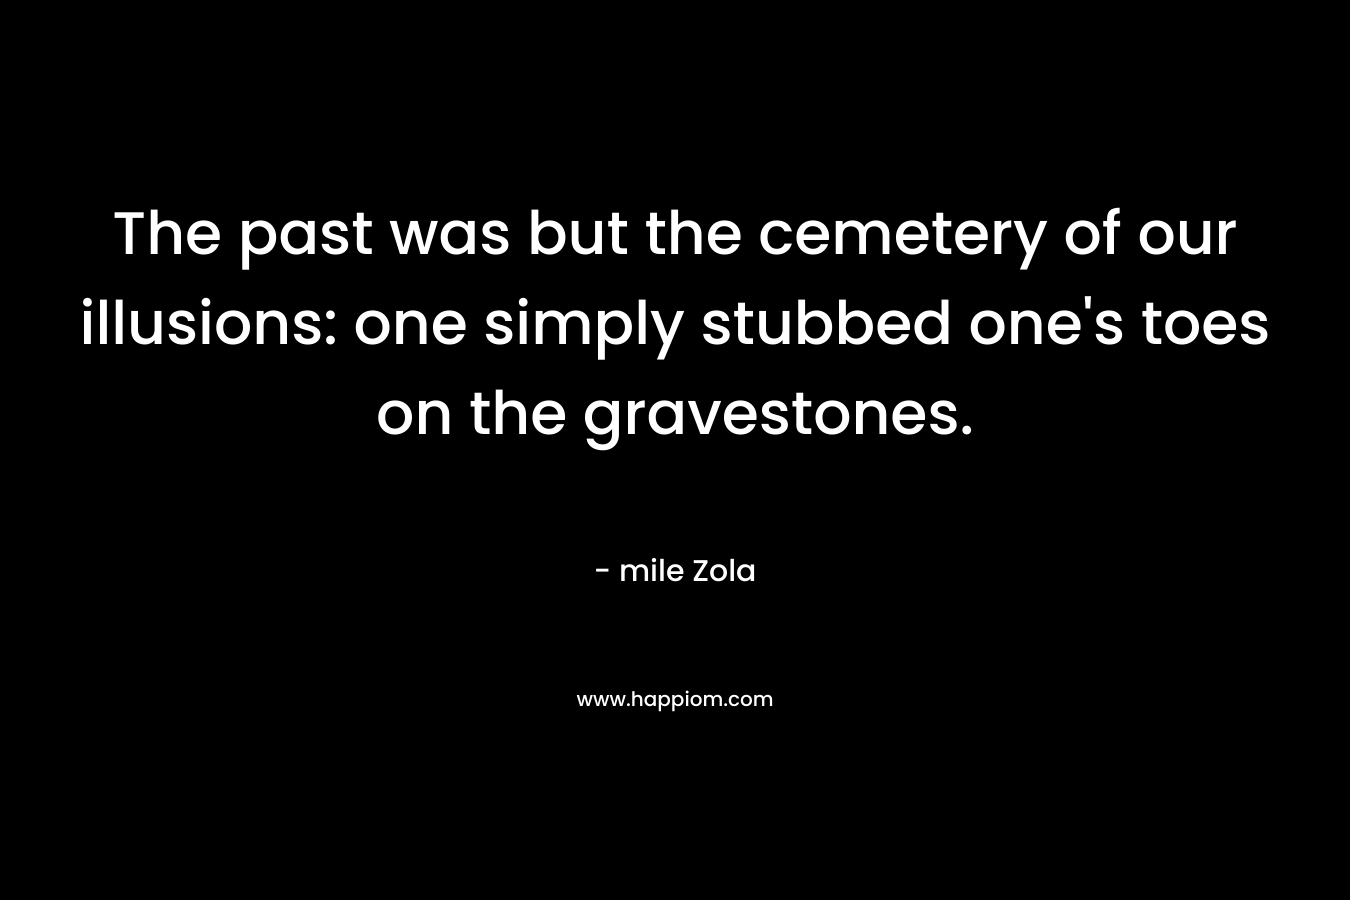 The past was but the cemetery of our illusions: one simply stubbed one’s toes on the gravestones. – mile Zola